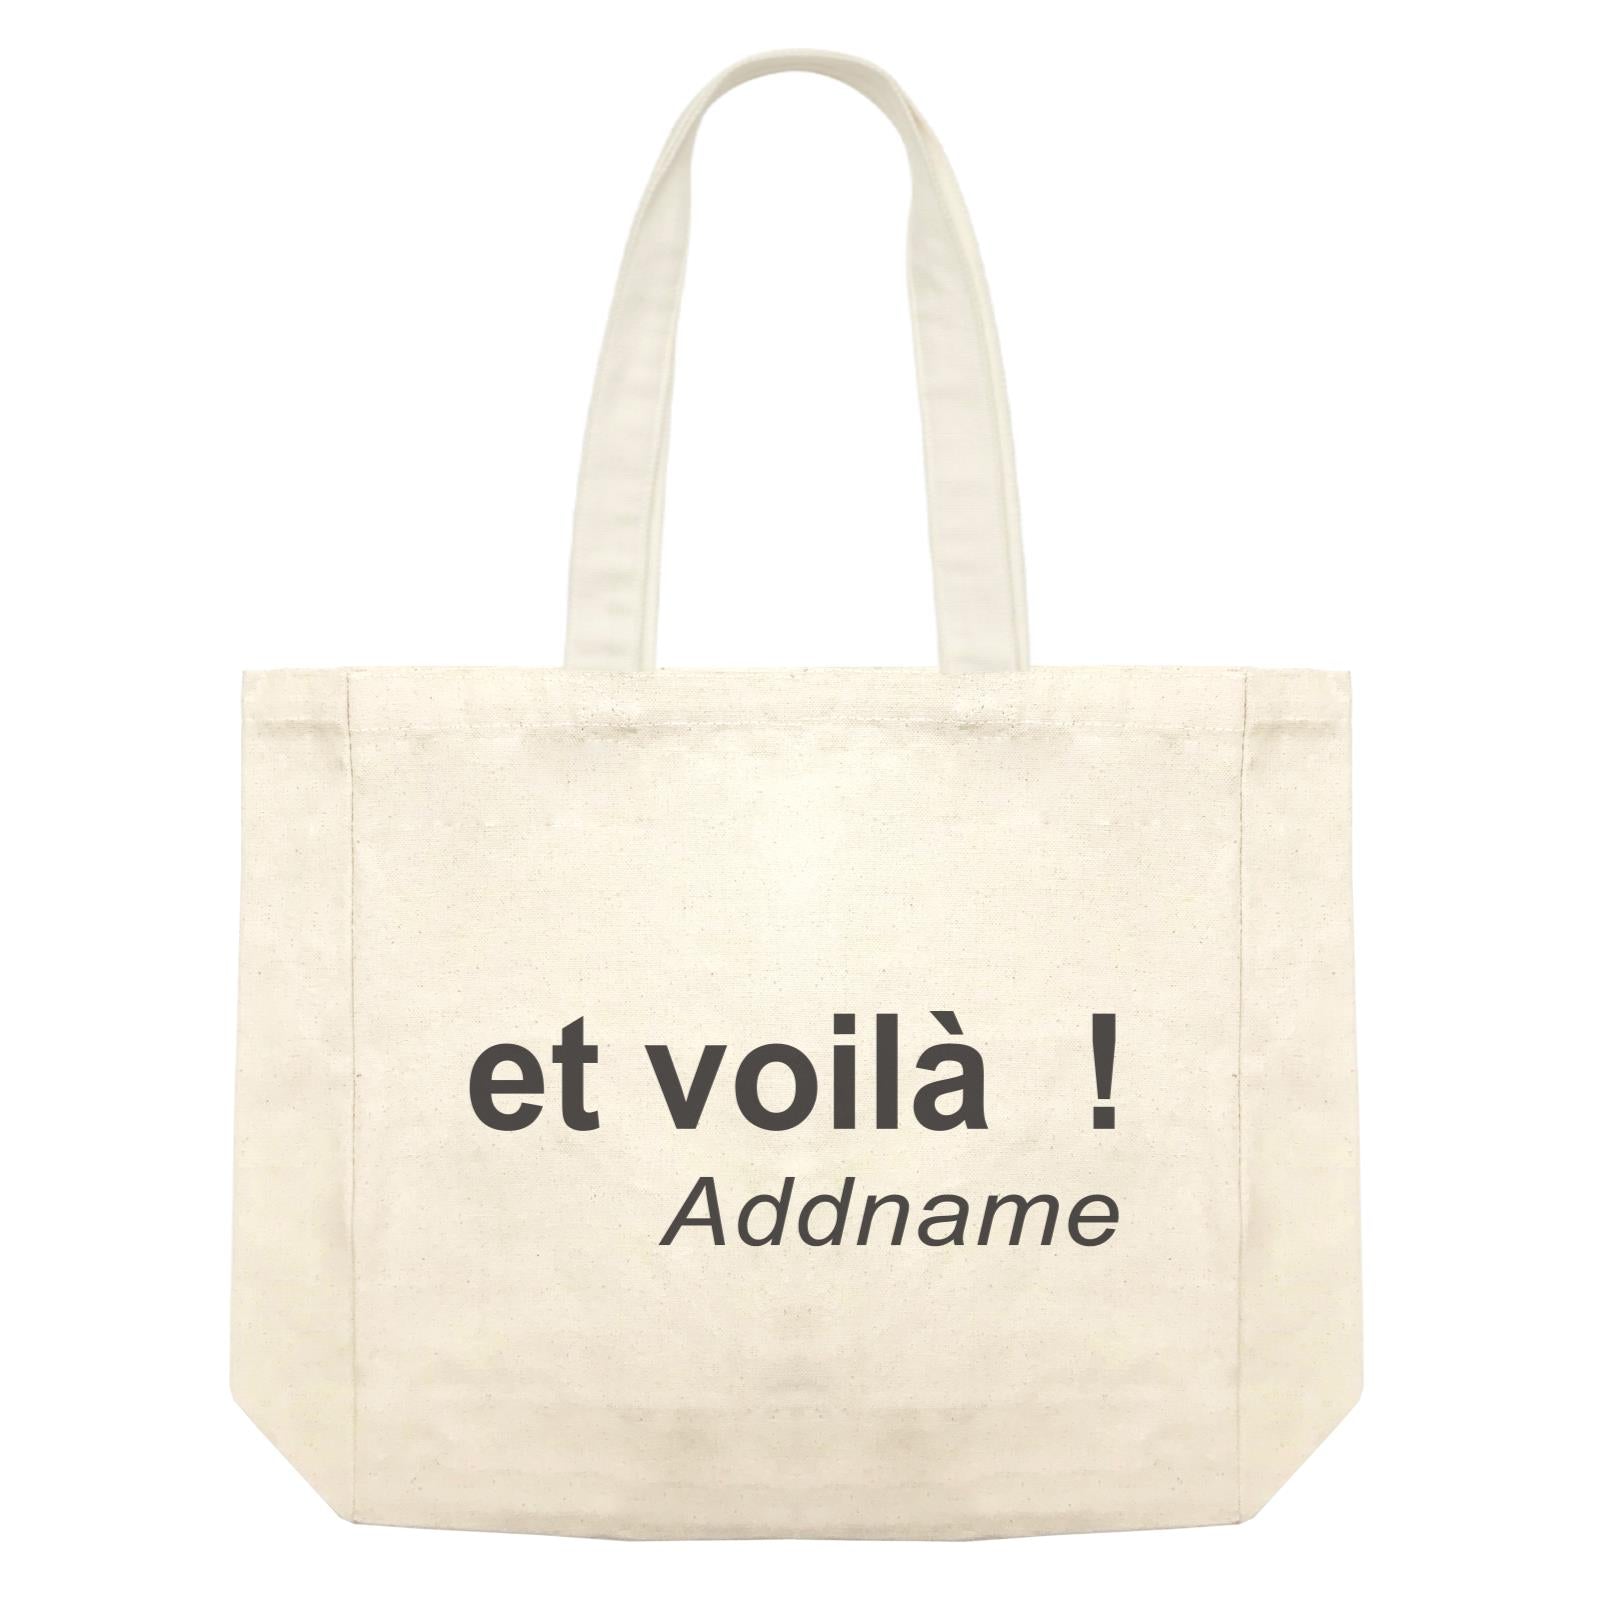 Random Quotes Et Voila Mean There You Go Addname Shopping Bag